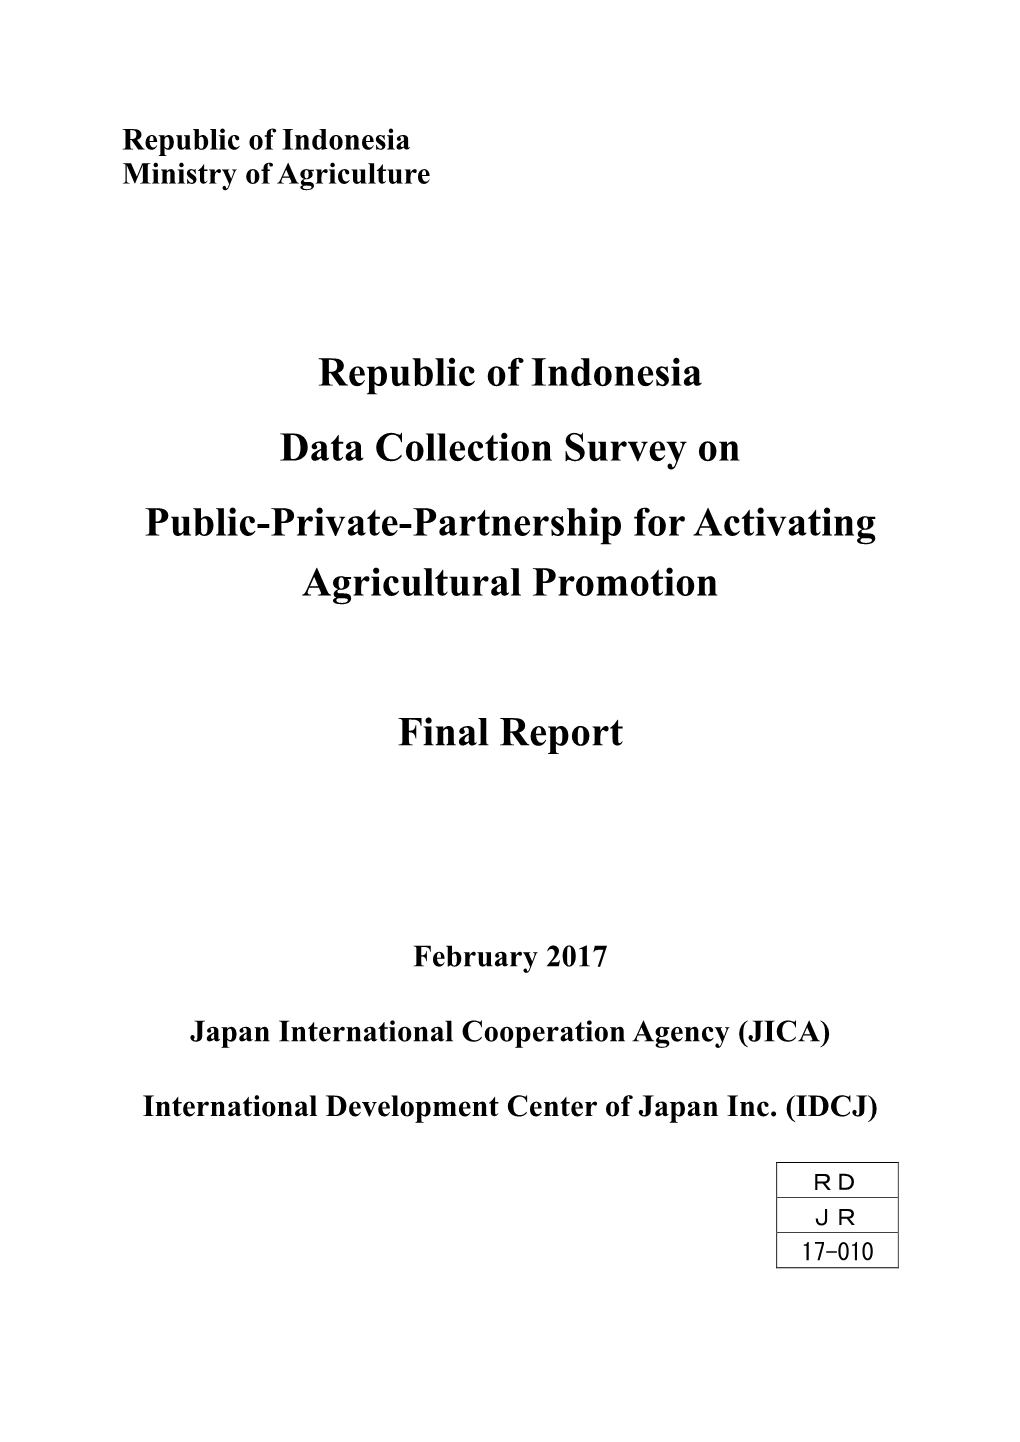 Republic of Indonesia Data Collection Survey on Public-Private-Partnership for Activating Agricultural Promotion